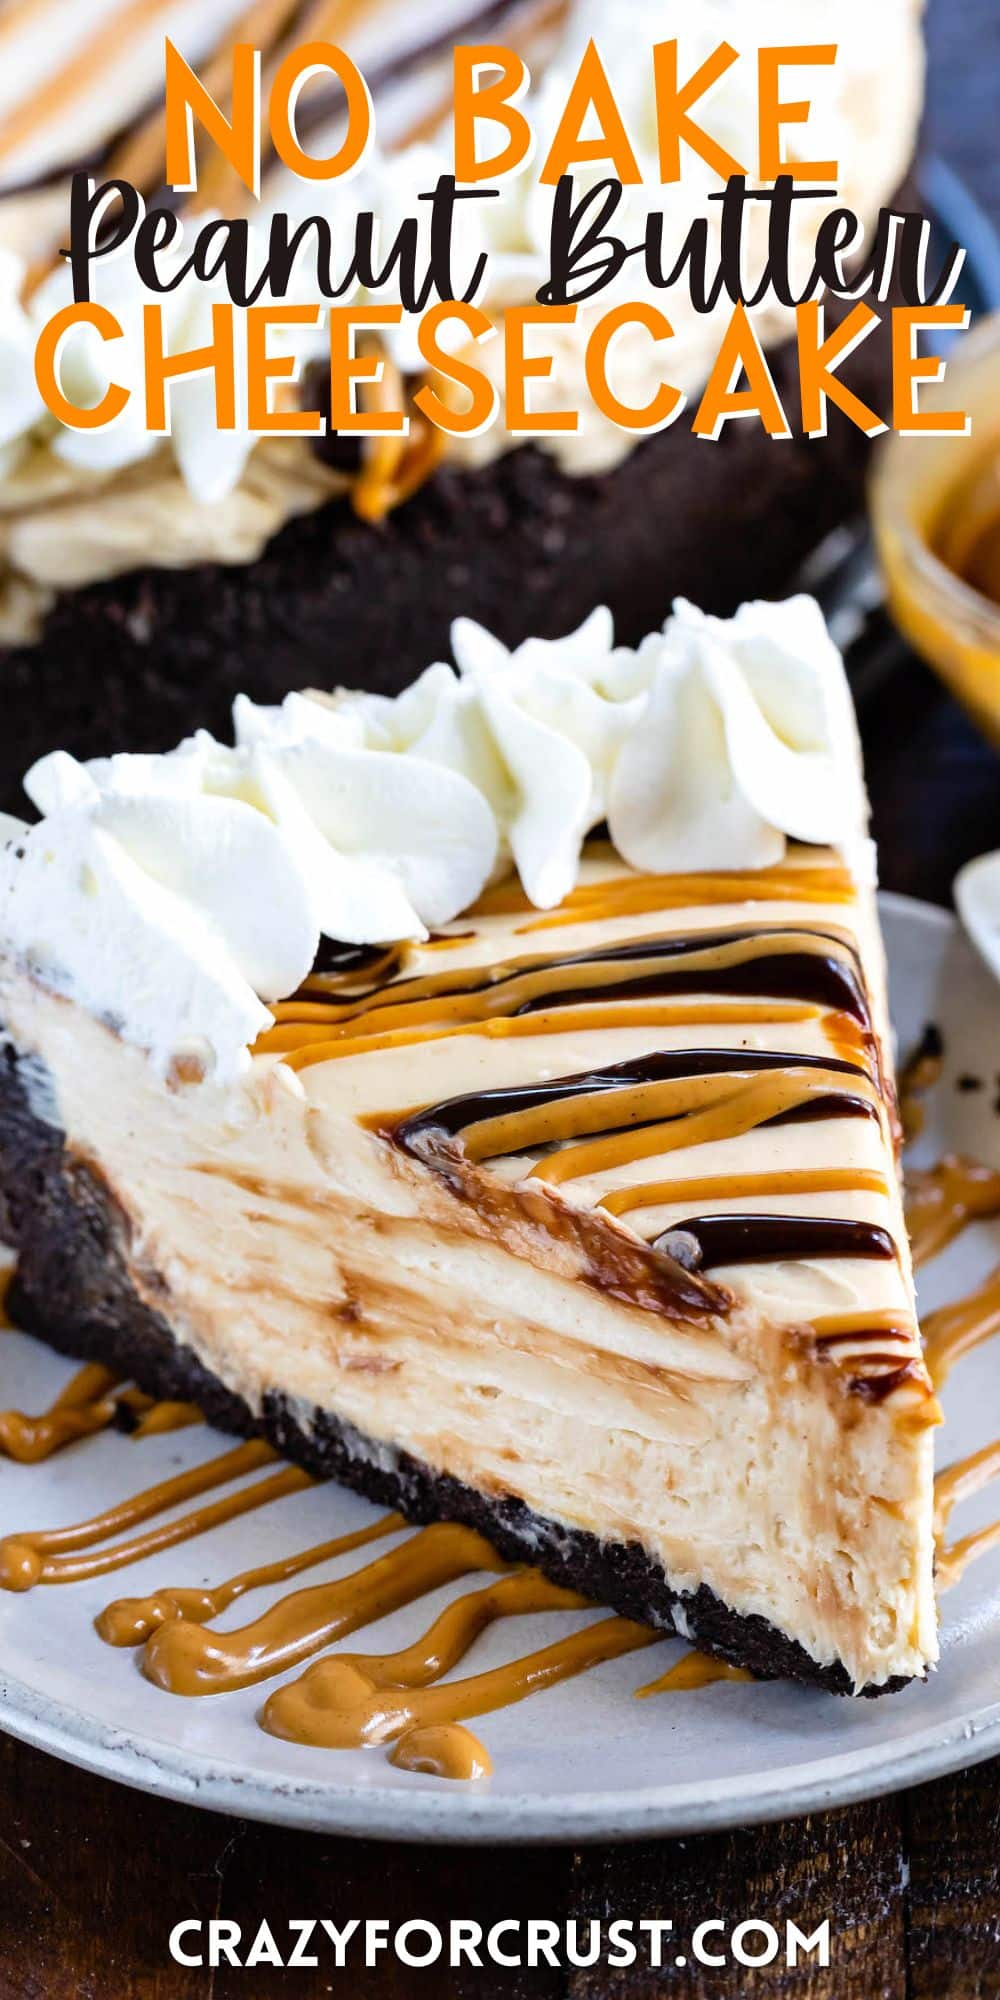 cheesecake with peanut butter and chocolate sauce drizzled over it and whipped cream on the edge with words on the image.